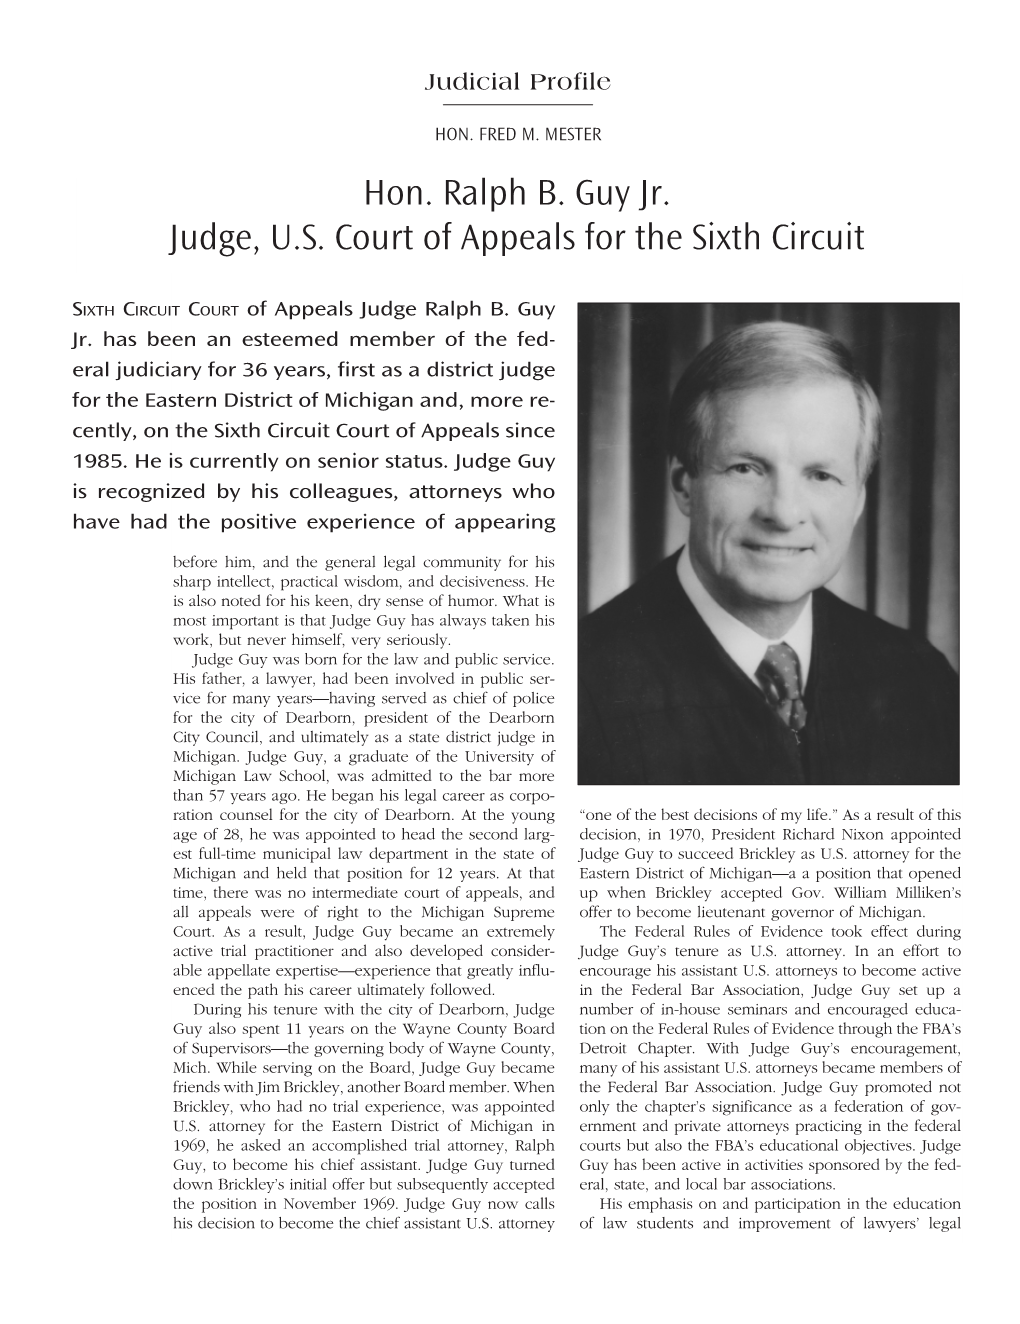 Hon. Ralph B. Guy Jr. Judge, U.S. Court of Appeals for the Sixth Circuit